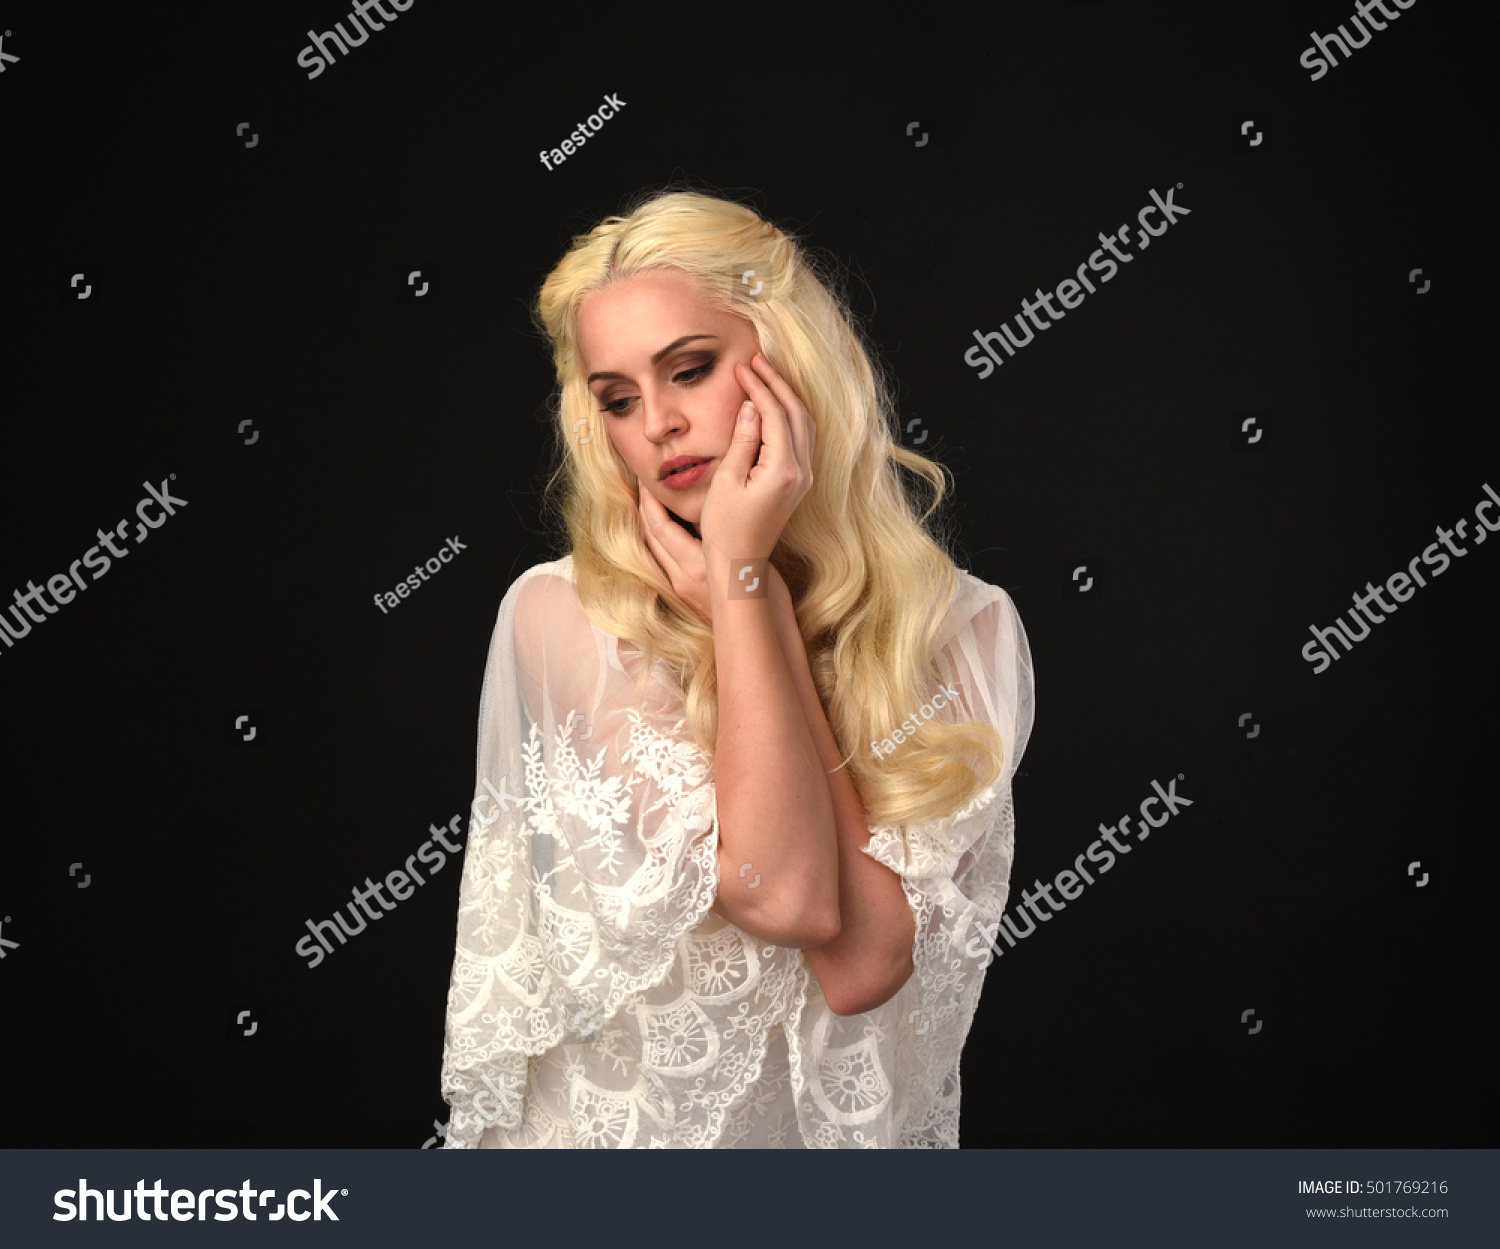 portrait of a beautiful woman with long blonde hair, wearing a white lace dress. isolated on a black background. #501769216